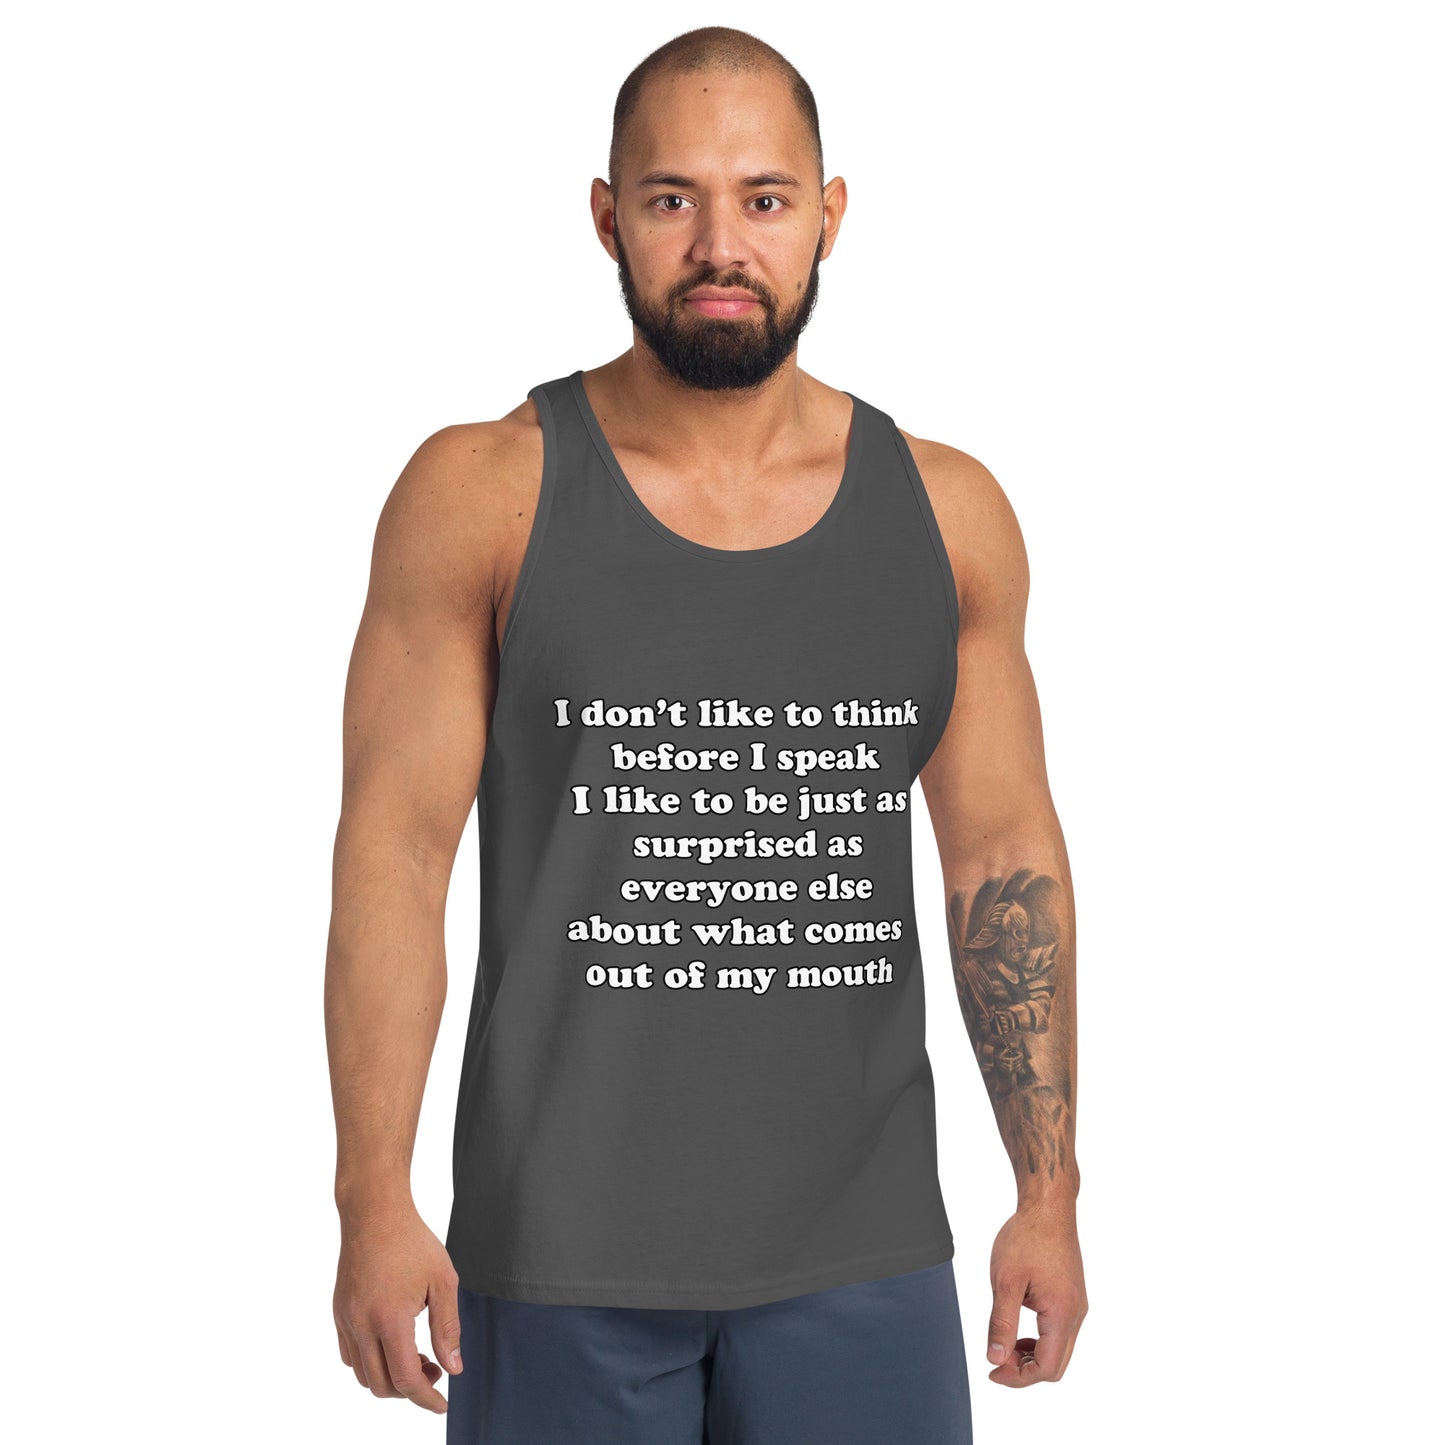 Man with asphalt grey tank top with text “I don't think before I speak Just as serprised as everyone about what comes out of my mouth"